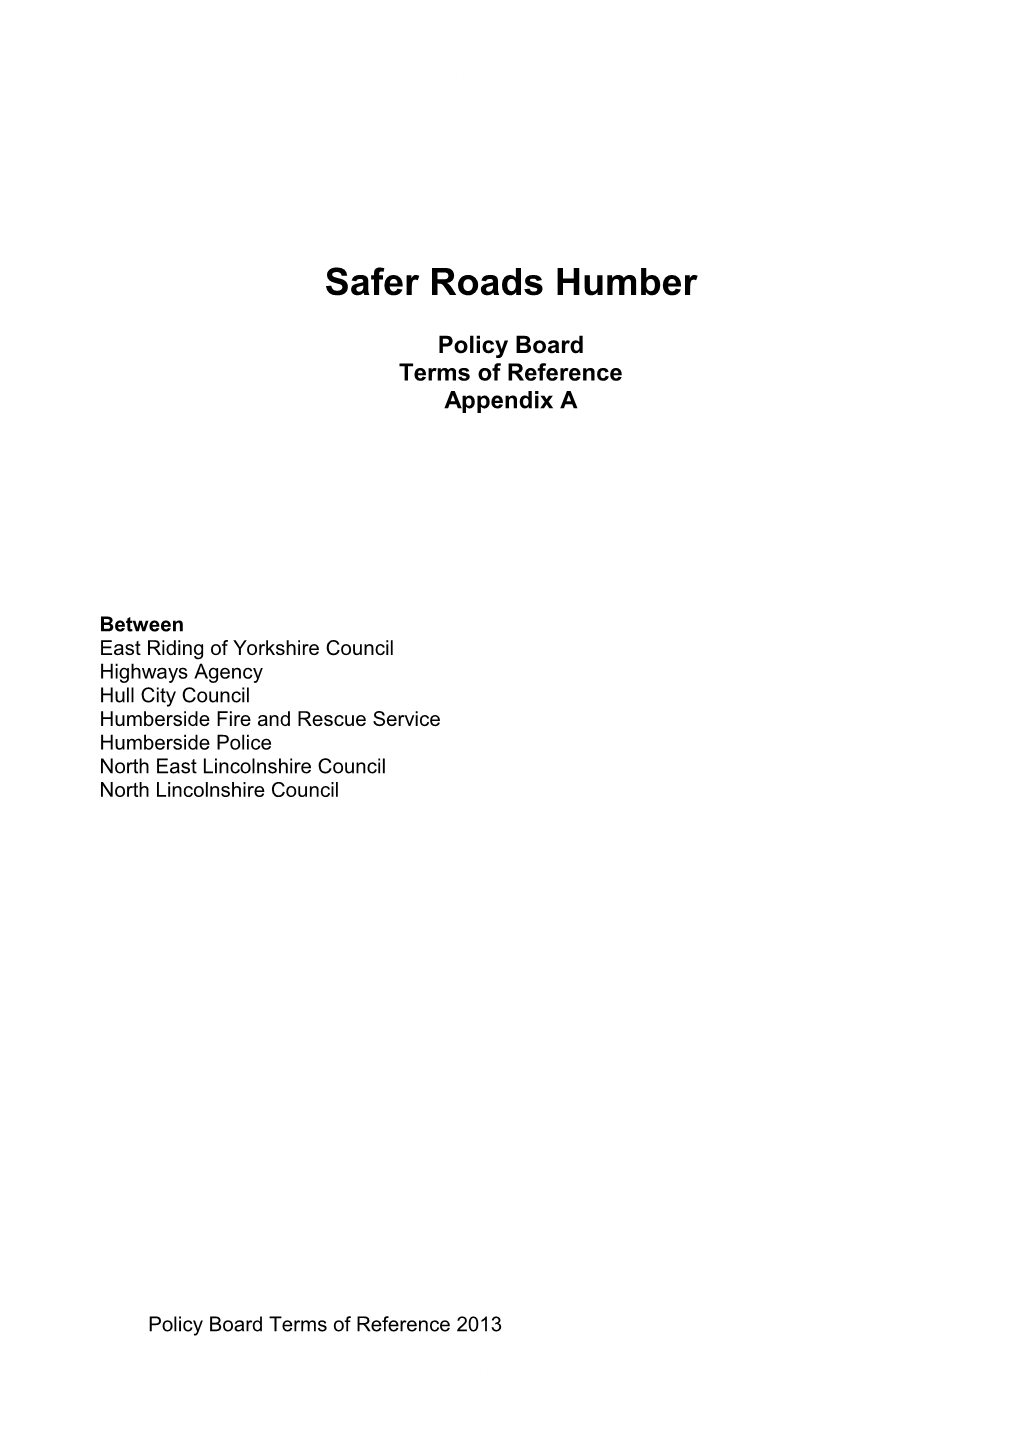 Safer Roads-Humber Policy Board